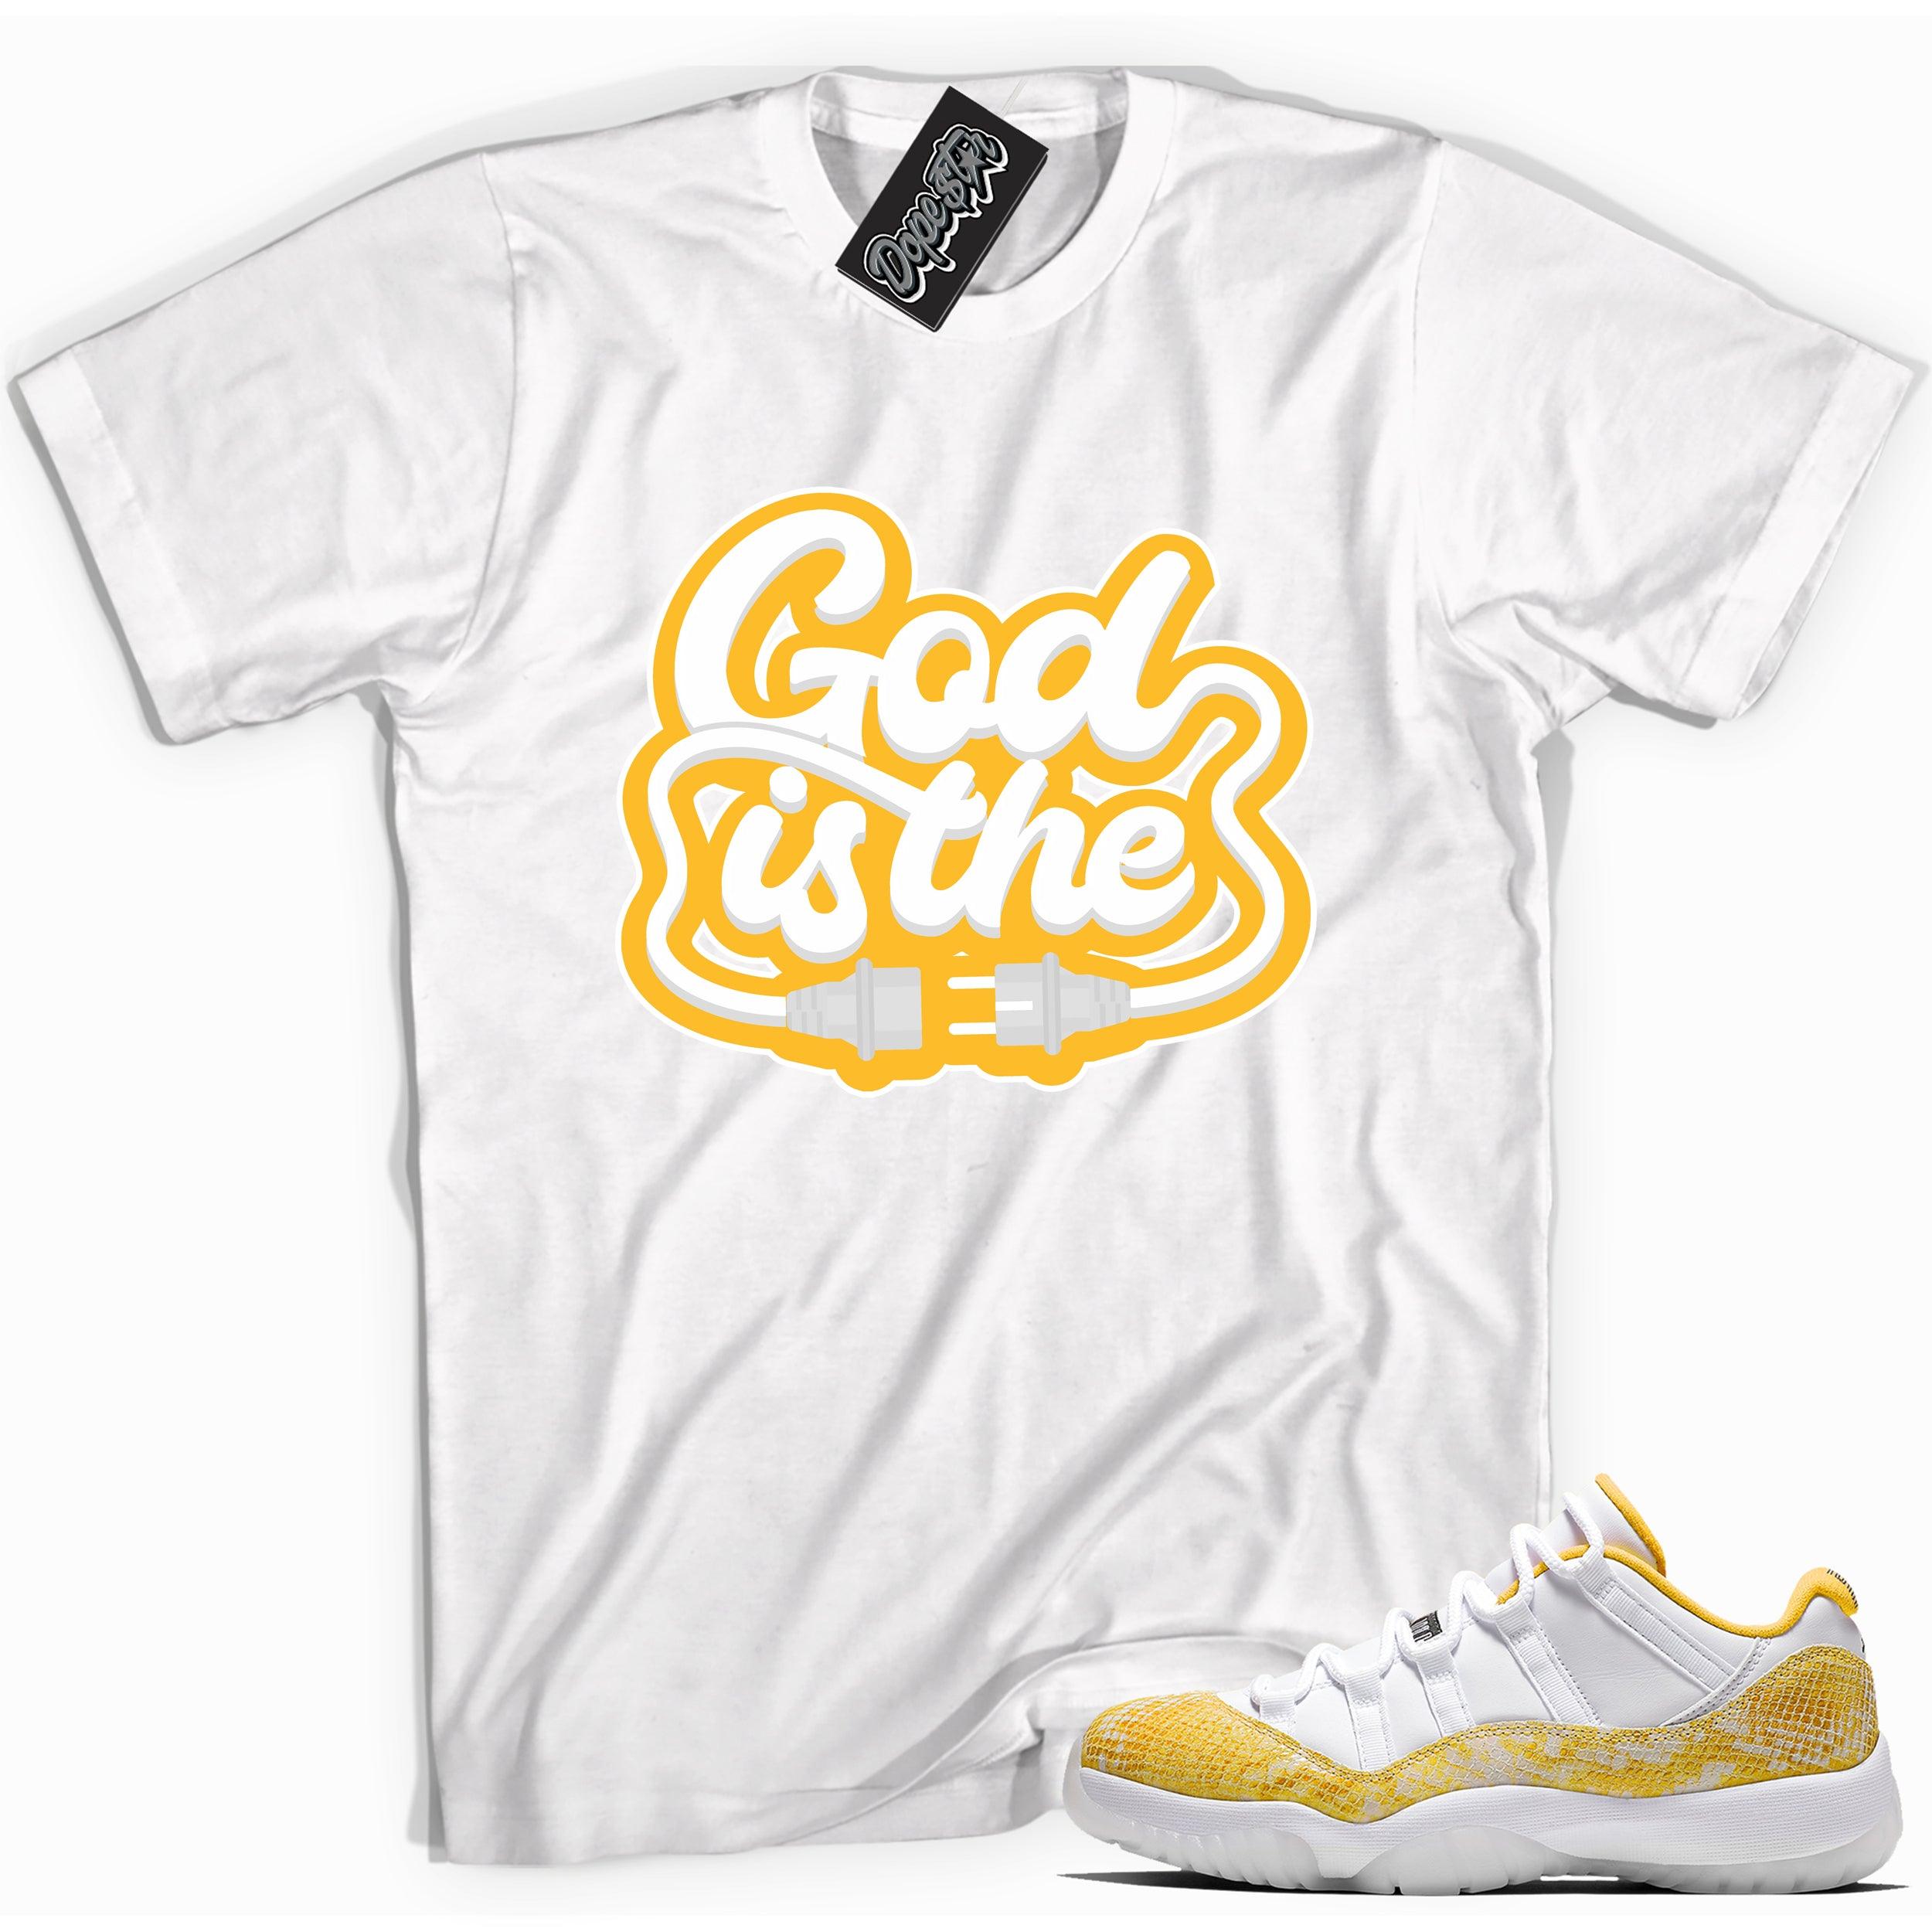 Cool white graphic tee with 'god is the plug' print, that perfectly matches Air Jordan 11 Low Yellow Snakeskin sneakers